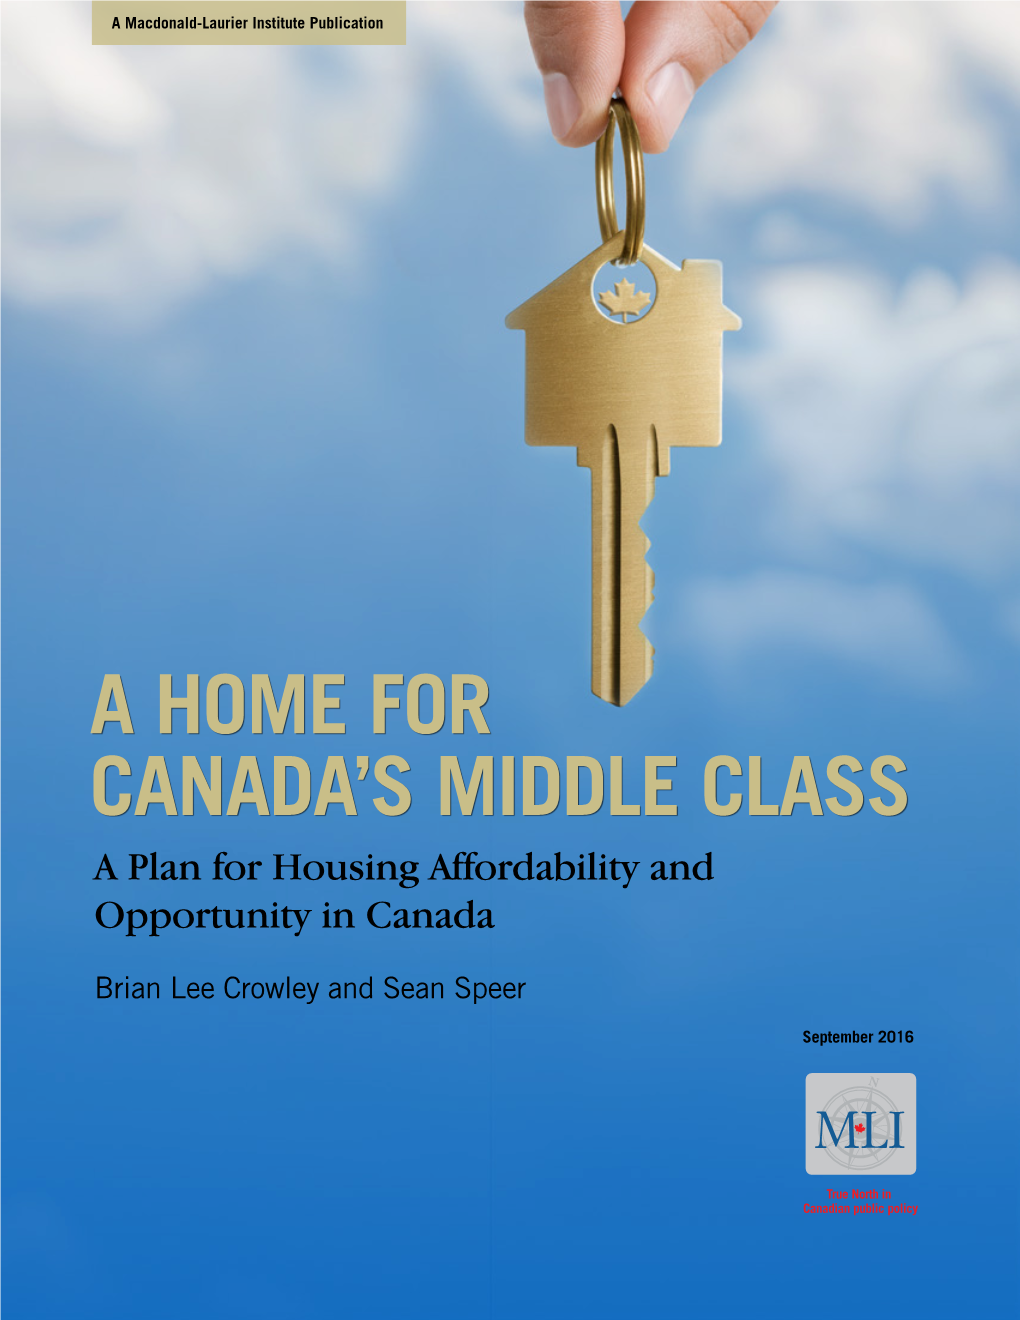 A Home for Canada's Middle Class